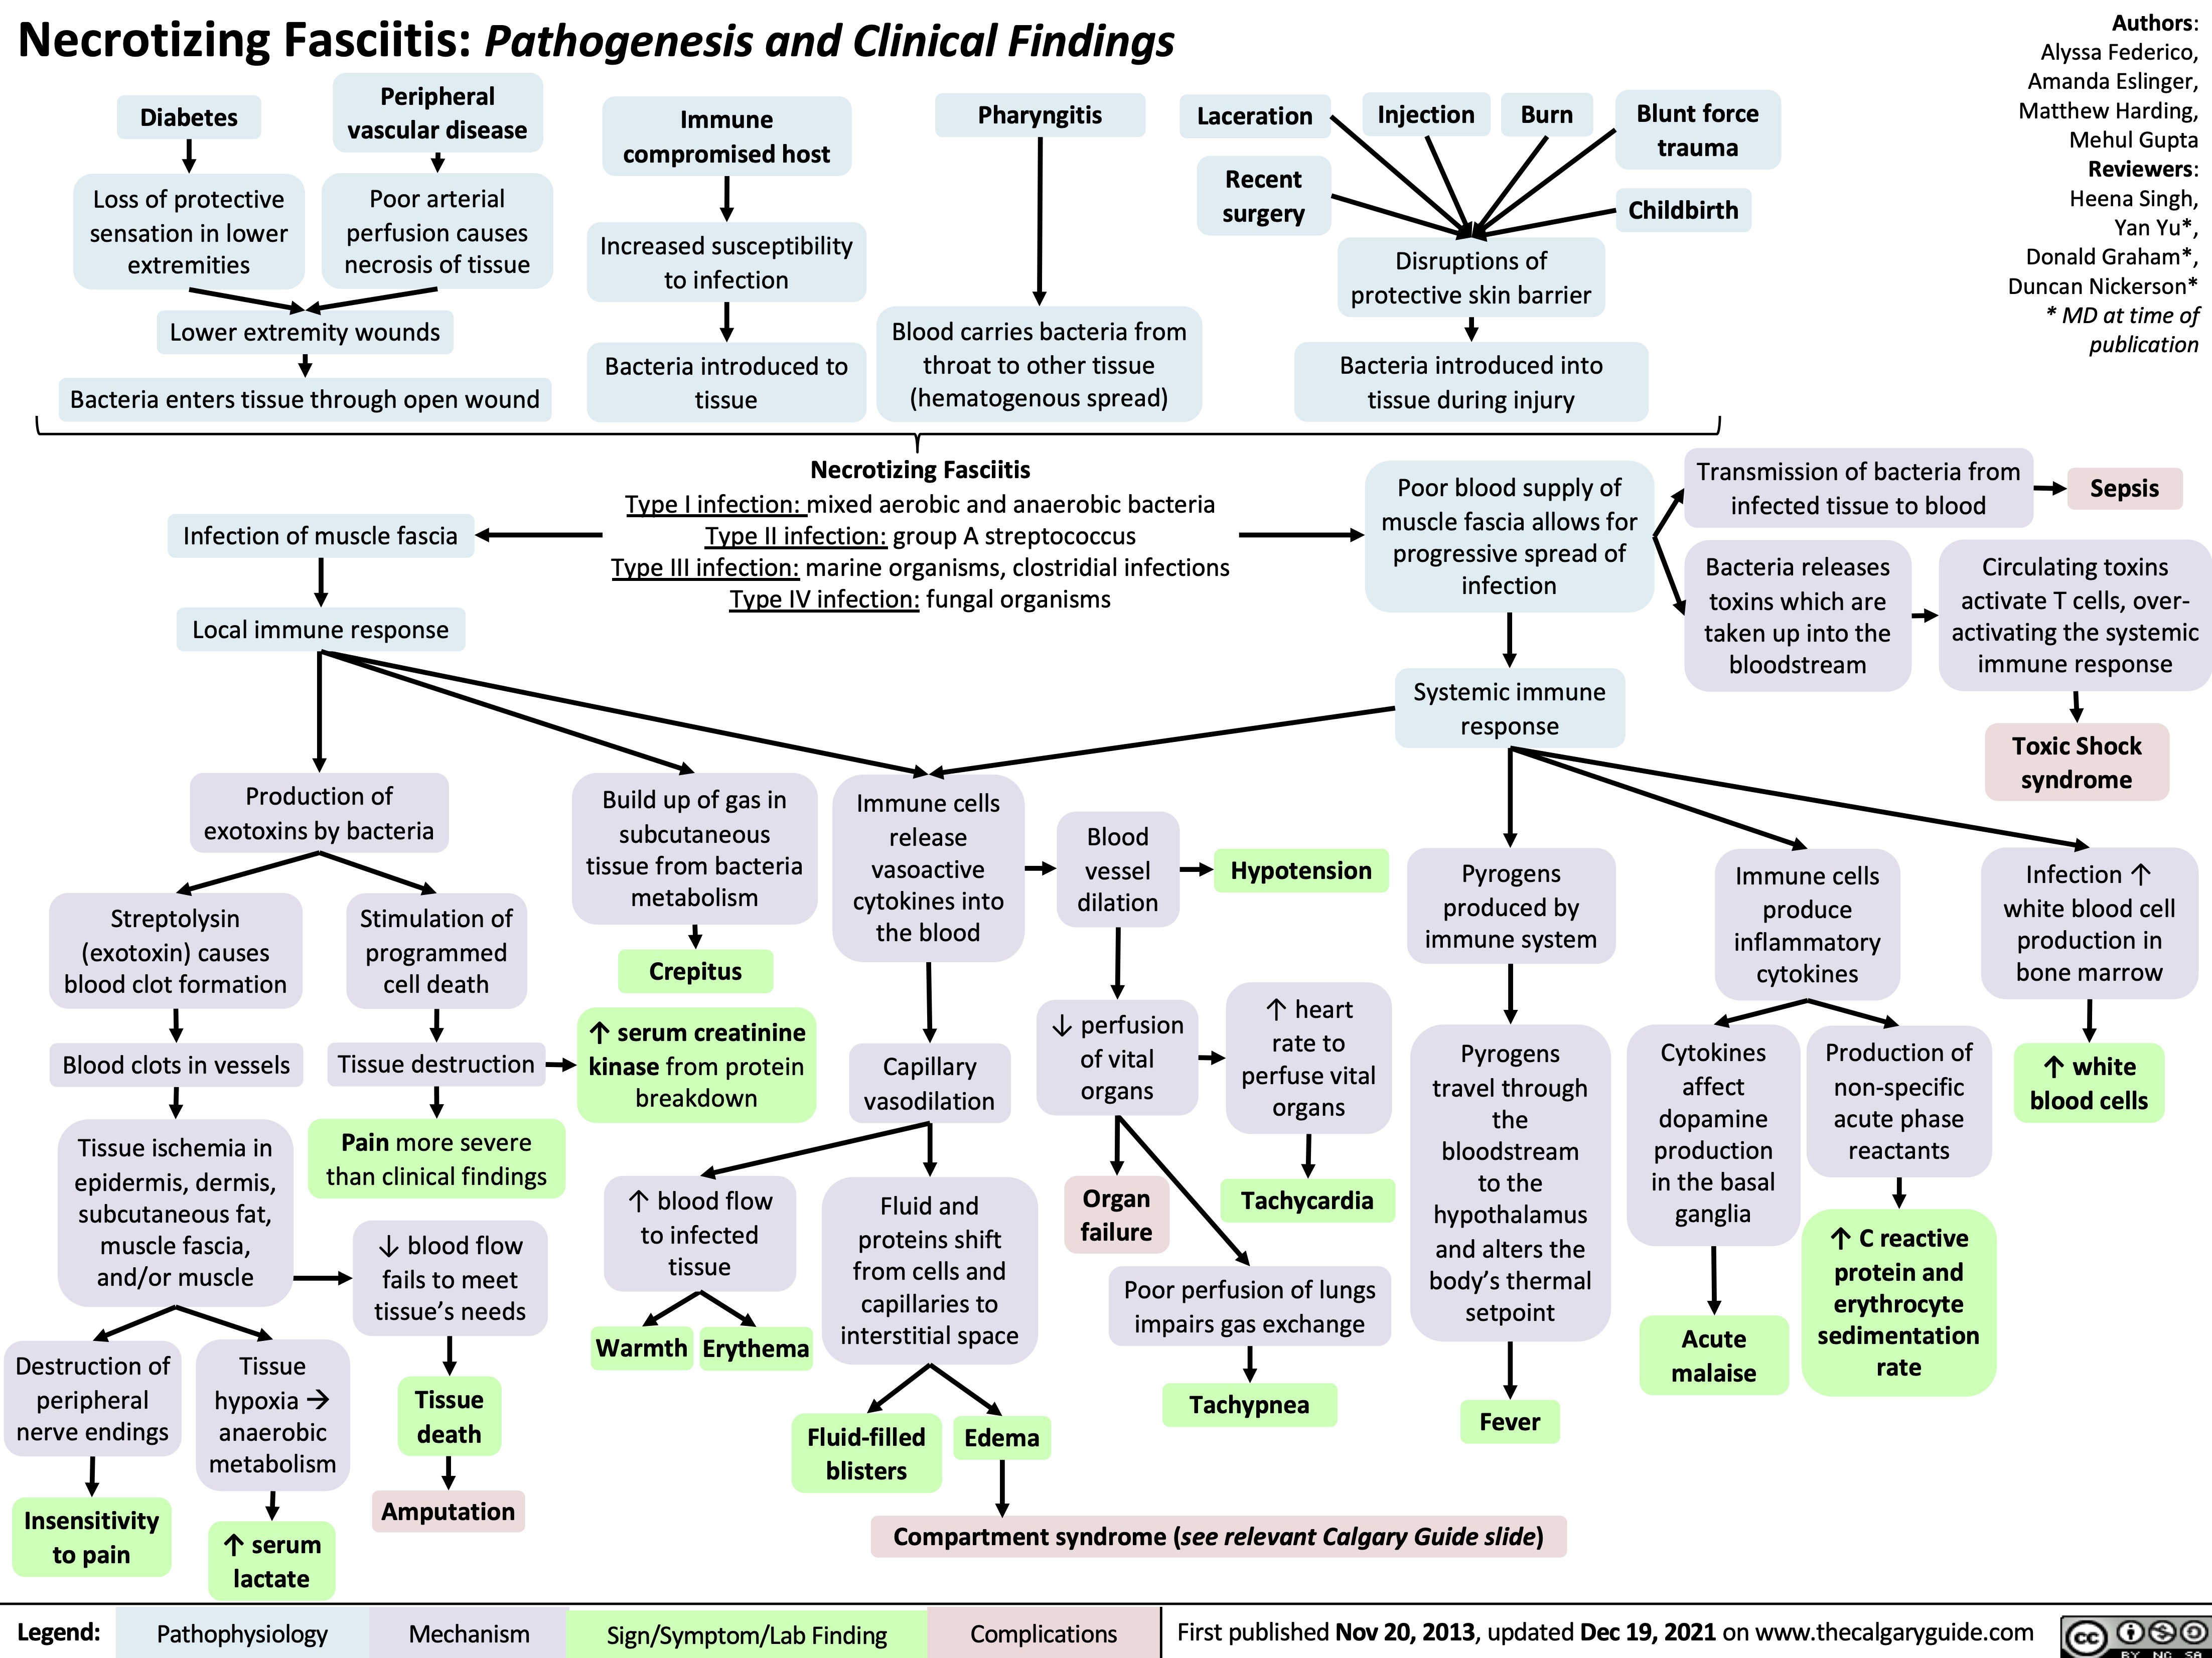 Necrotizing Fasciitis: Pathogenesis and Clinical Findings
Authors: Alyssa Federico, Amanda Eslinger, Matthew Harding, Mehul Gupta Reviewers: Heena Singh, Yan Yu*, Donald Graham*, Duncan Nickerson* * MD at time of publication
       Diabetes
Loss of protective sensation in lower extremities
Peripheral vascular disease
Poor arterial perfusion causes necrosis of tissue
Immune compromised host
Increased susceptibility to infection
Bacteria introduced to tissue
Pharyngitis
Blood carries bacteria from throat to other tissue (hematogenous spread)
Laceration
Recent surgery
Injection
Burn
Blunt force trauma
Childbirth
            Lower extremity wounds
Bacteria enters tissue through open wound
Infection of muscle fascia Local immune response
Production of exotoxins by bacteria
Disruptions of protective skin barrier
Bacteria introduced into tissue during injury
     Necrotizing Fasciitis
Type I infection: mixed aerobic and anaerobic bacteria Type II infection: group A streptococcus
Type III infection: marine organisms, clostridial infections Type IV infection: fungal organisms
Poor blood supply of muscle fascia allows for progressive spread of infection
Systemic immune response
Pyrogens produced by immune system
Pyrogens travel through
the bloodstream to the hypothalamus and alters the body’s thermal setpoint
Transmission of bacteria from infected tissue to blood
Sepsis
                                 Streptolysin (exotoxin) causes blood clot formation
Blood clots in vessels
Tissue ischemia in epidermis, dermis, subcutaneous fat, muscle fascia, and/or muscle
Stimulation of programmed cell death
Tissue destruction
Pain more severe than clinical findings
↓ blood flow fails to meet tissue’s needs
Tissue death
Build up of gas in subcutaneous
tissue from bacteria metabolism
Crepitus
↑ serum creatinine
kinase from protein breakdown
↑ blood flow to infected tissue
Warmth Erythema
Immune cells release vasoactive cytokines into the blood
Capillary vasodilation
Fluid and proteins shift from cells and capillaries to interstitial space
Blood
vessel dilation
↓ perfusion of vital organs
Organ failure
Hypotension
↑ heart rate to perfuse vital organs
Tachycardia
Bacteria releases toxins which are taken up into the bloodstream
Immune cells produce inflammatory cytokines
Circulating toxins activate T cells, over- activating the systemic immune response
Toxic Shock syndrome
Infection ↑ white blood cell production in bone marrow
↑ white blood cells
                         Destructionof peripheral nerve endings
Insensitivity to pain
Tissue hypoxia à anaerobic metabolism
Poor perfusion of lungs impairs gas exchange
Tachypnea
Cytokines affect dopamine production in the basal ganglia
Acute malaise
Production of non-specific acute phase reactants
↑ C reactive protein and erythrocyte sedimentation rate
 Fluid-filled blisters
Edema
Fever Compartment syndrome (see relevant Calgary Guide slide)
  Amputation ↑ serum
lactate
    Legend:
 Pathophysiology
 Mechanism
 Sign/Symptom/Lab Finding
 Complications
First published Nov 20, 2013, updated Dec 19, 2021 on www.thecalgaryguide.com
  